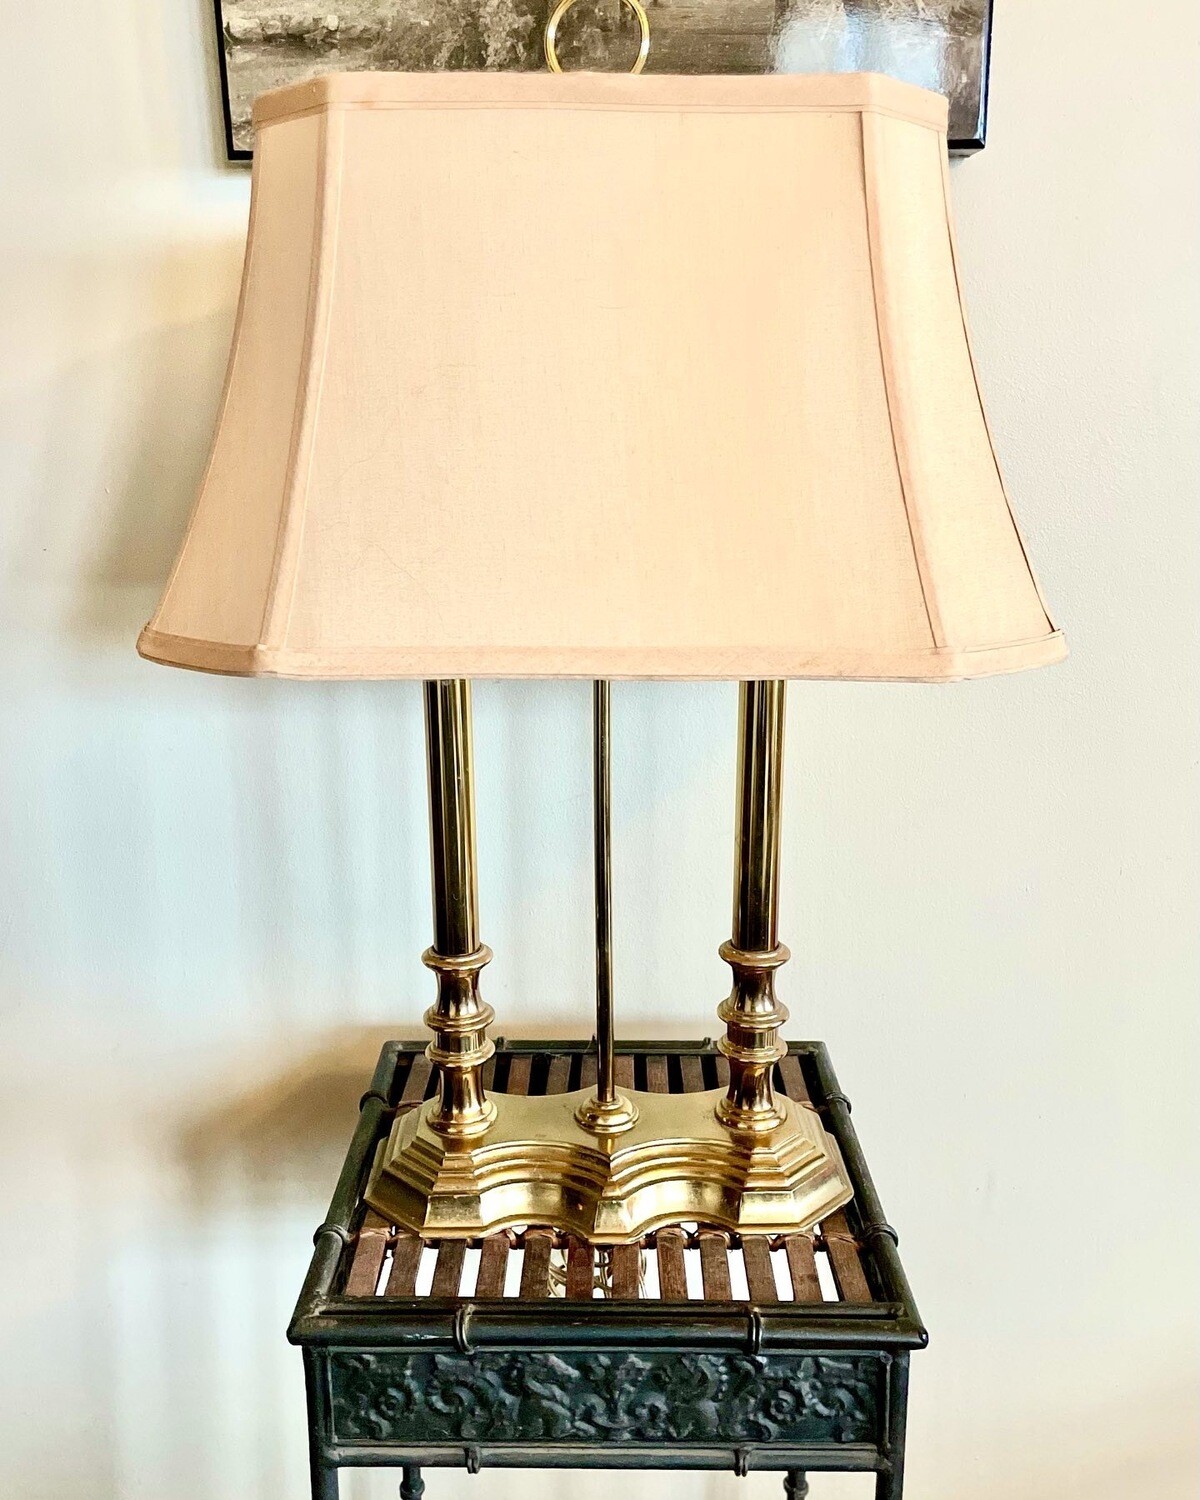 Vintage Brass Double Lamp with Shade 22 1/4"